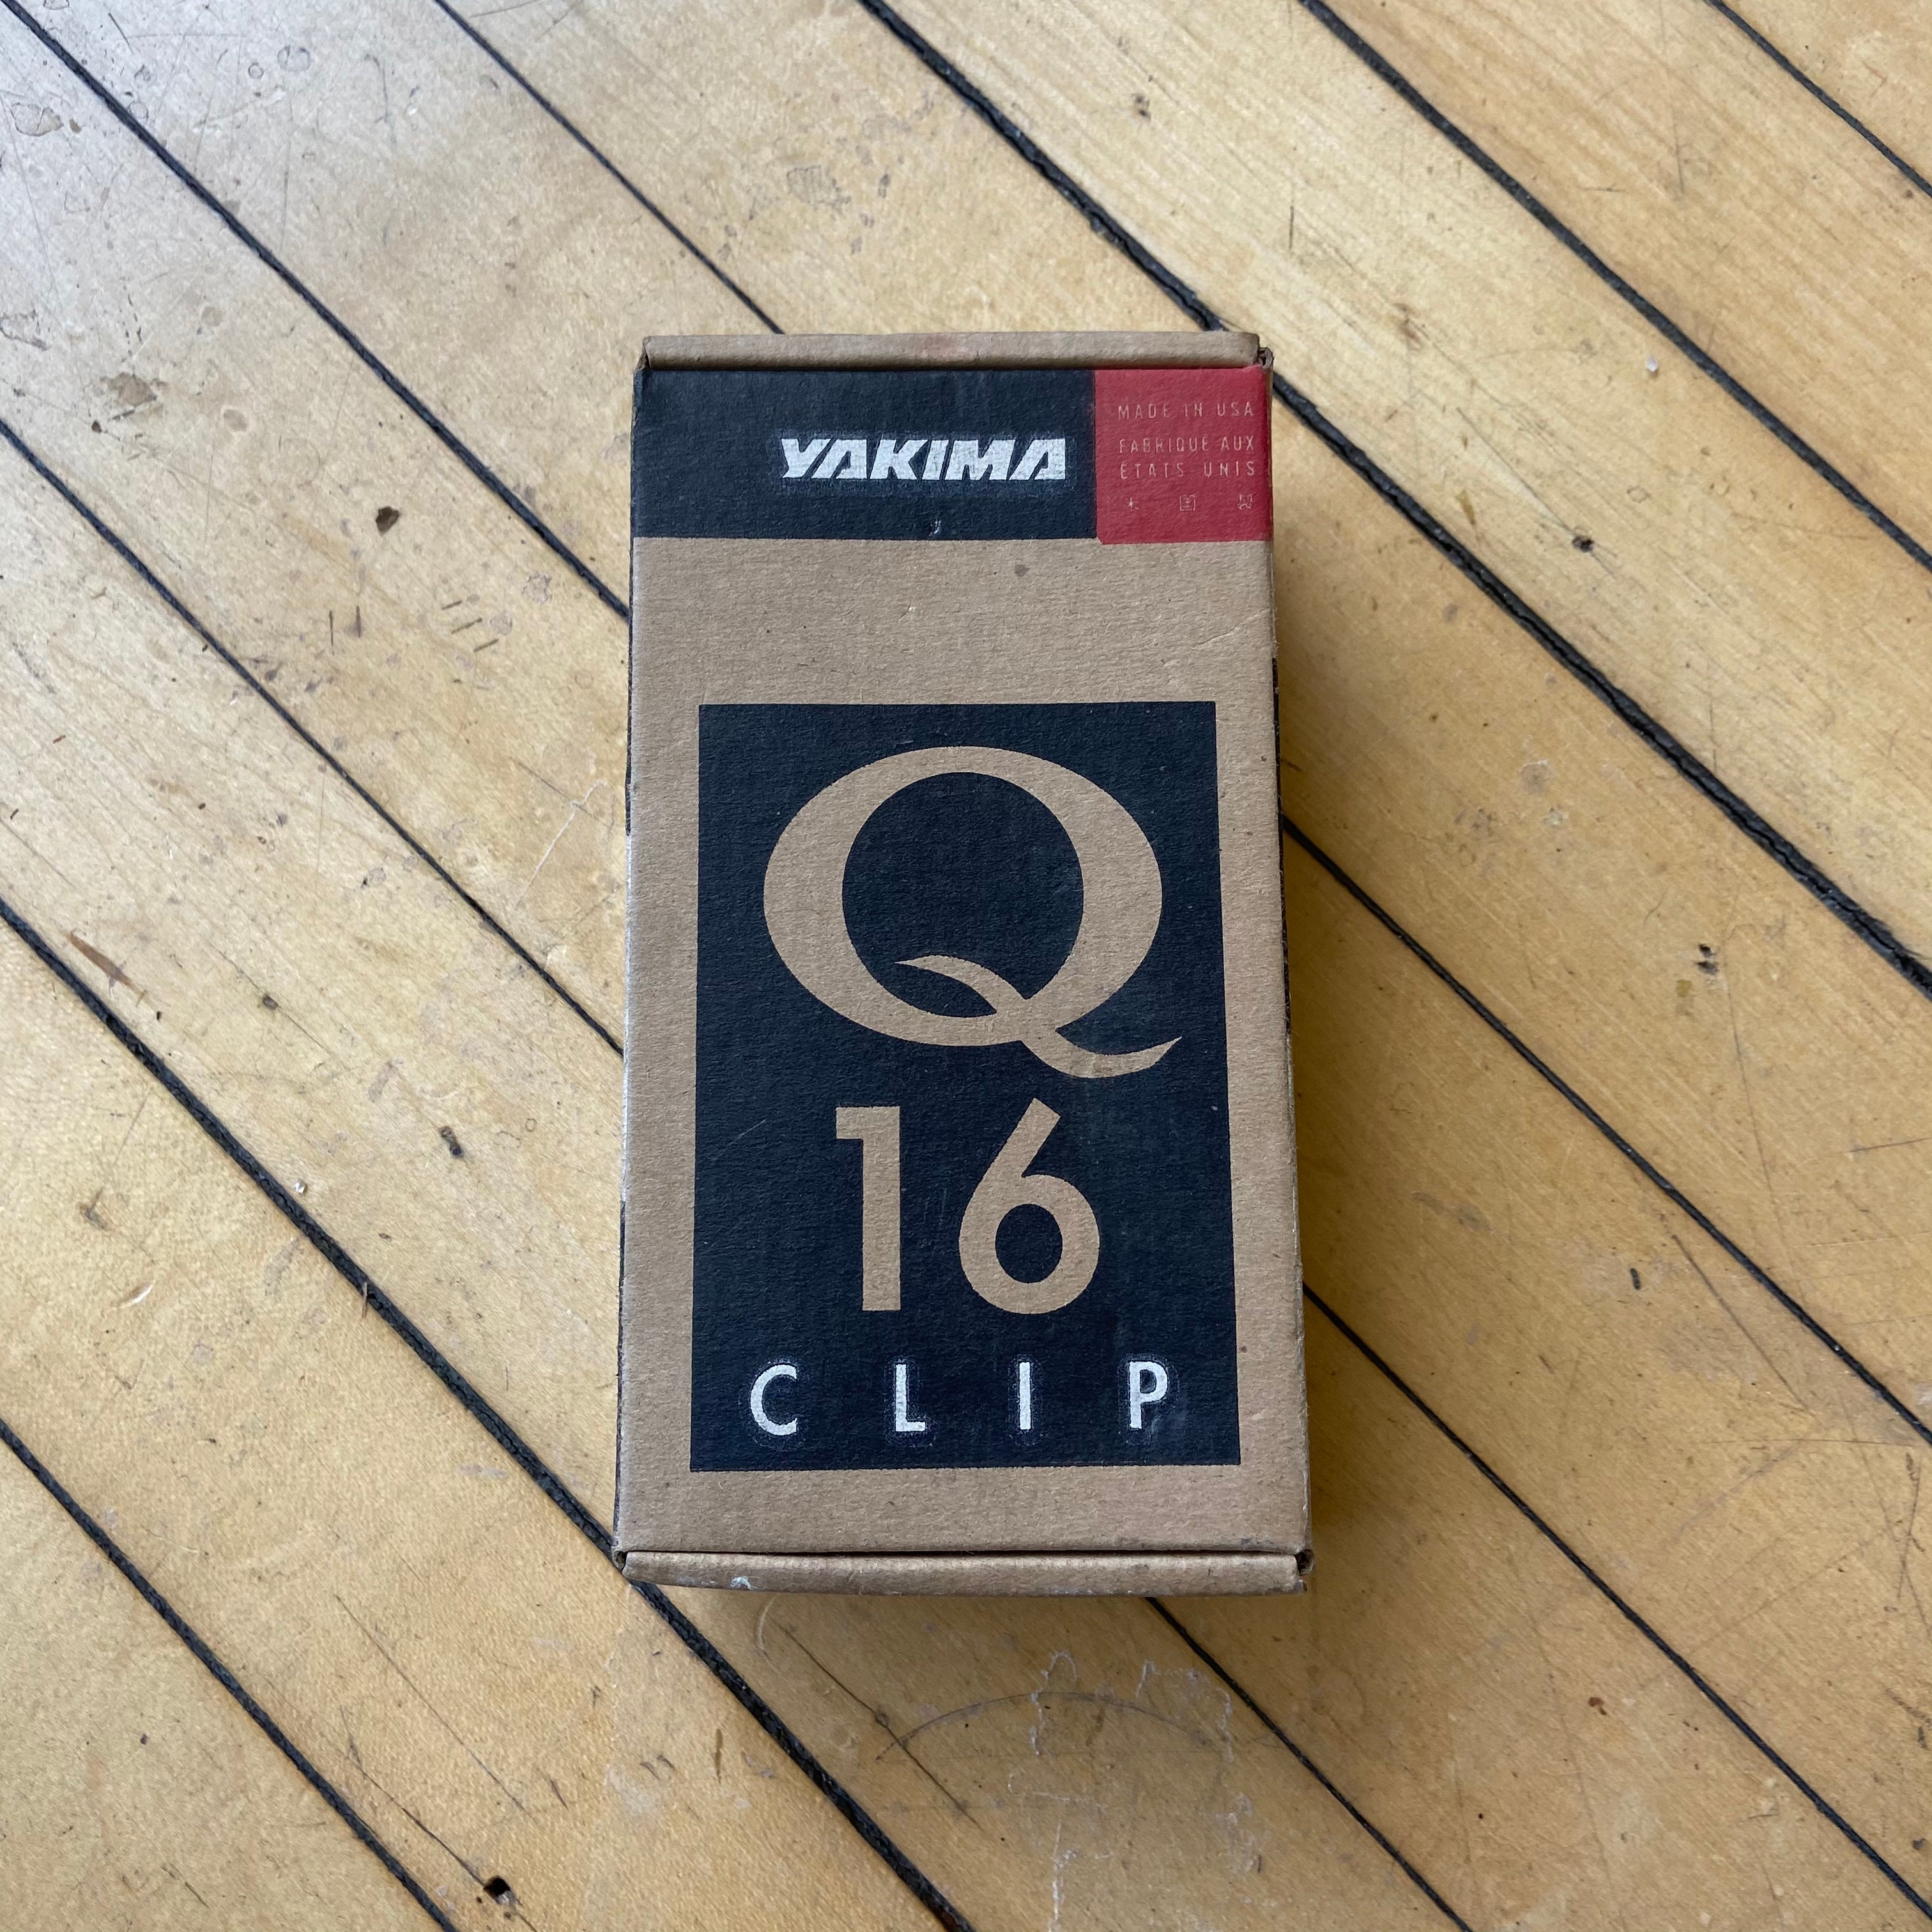 New Old Stock Yakima Assorted Q-Clips for Bike Roof Rack - The Bikesmiths